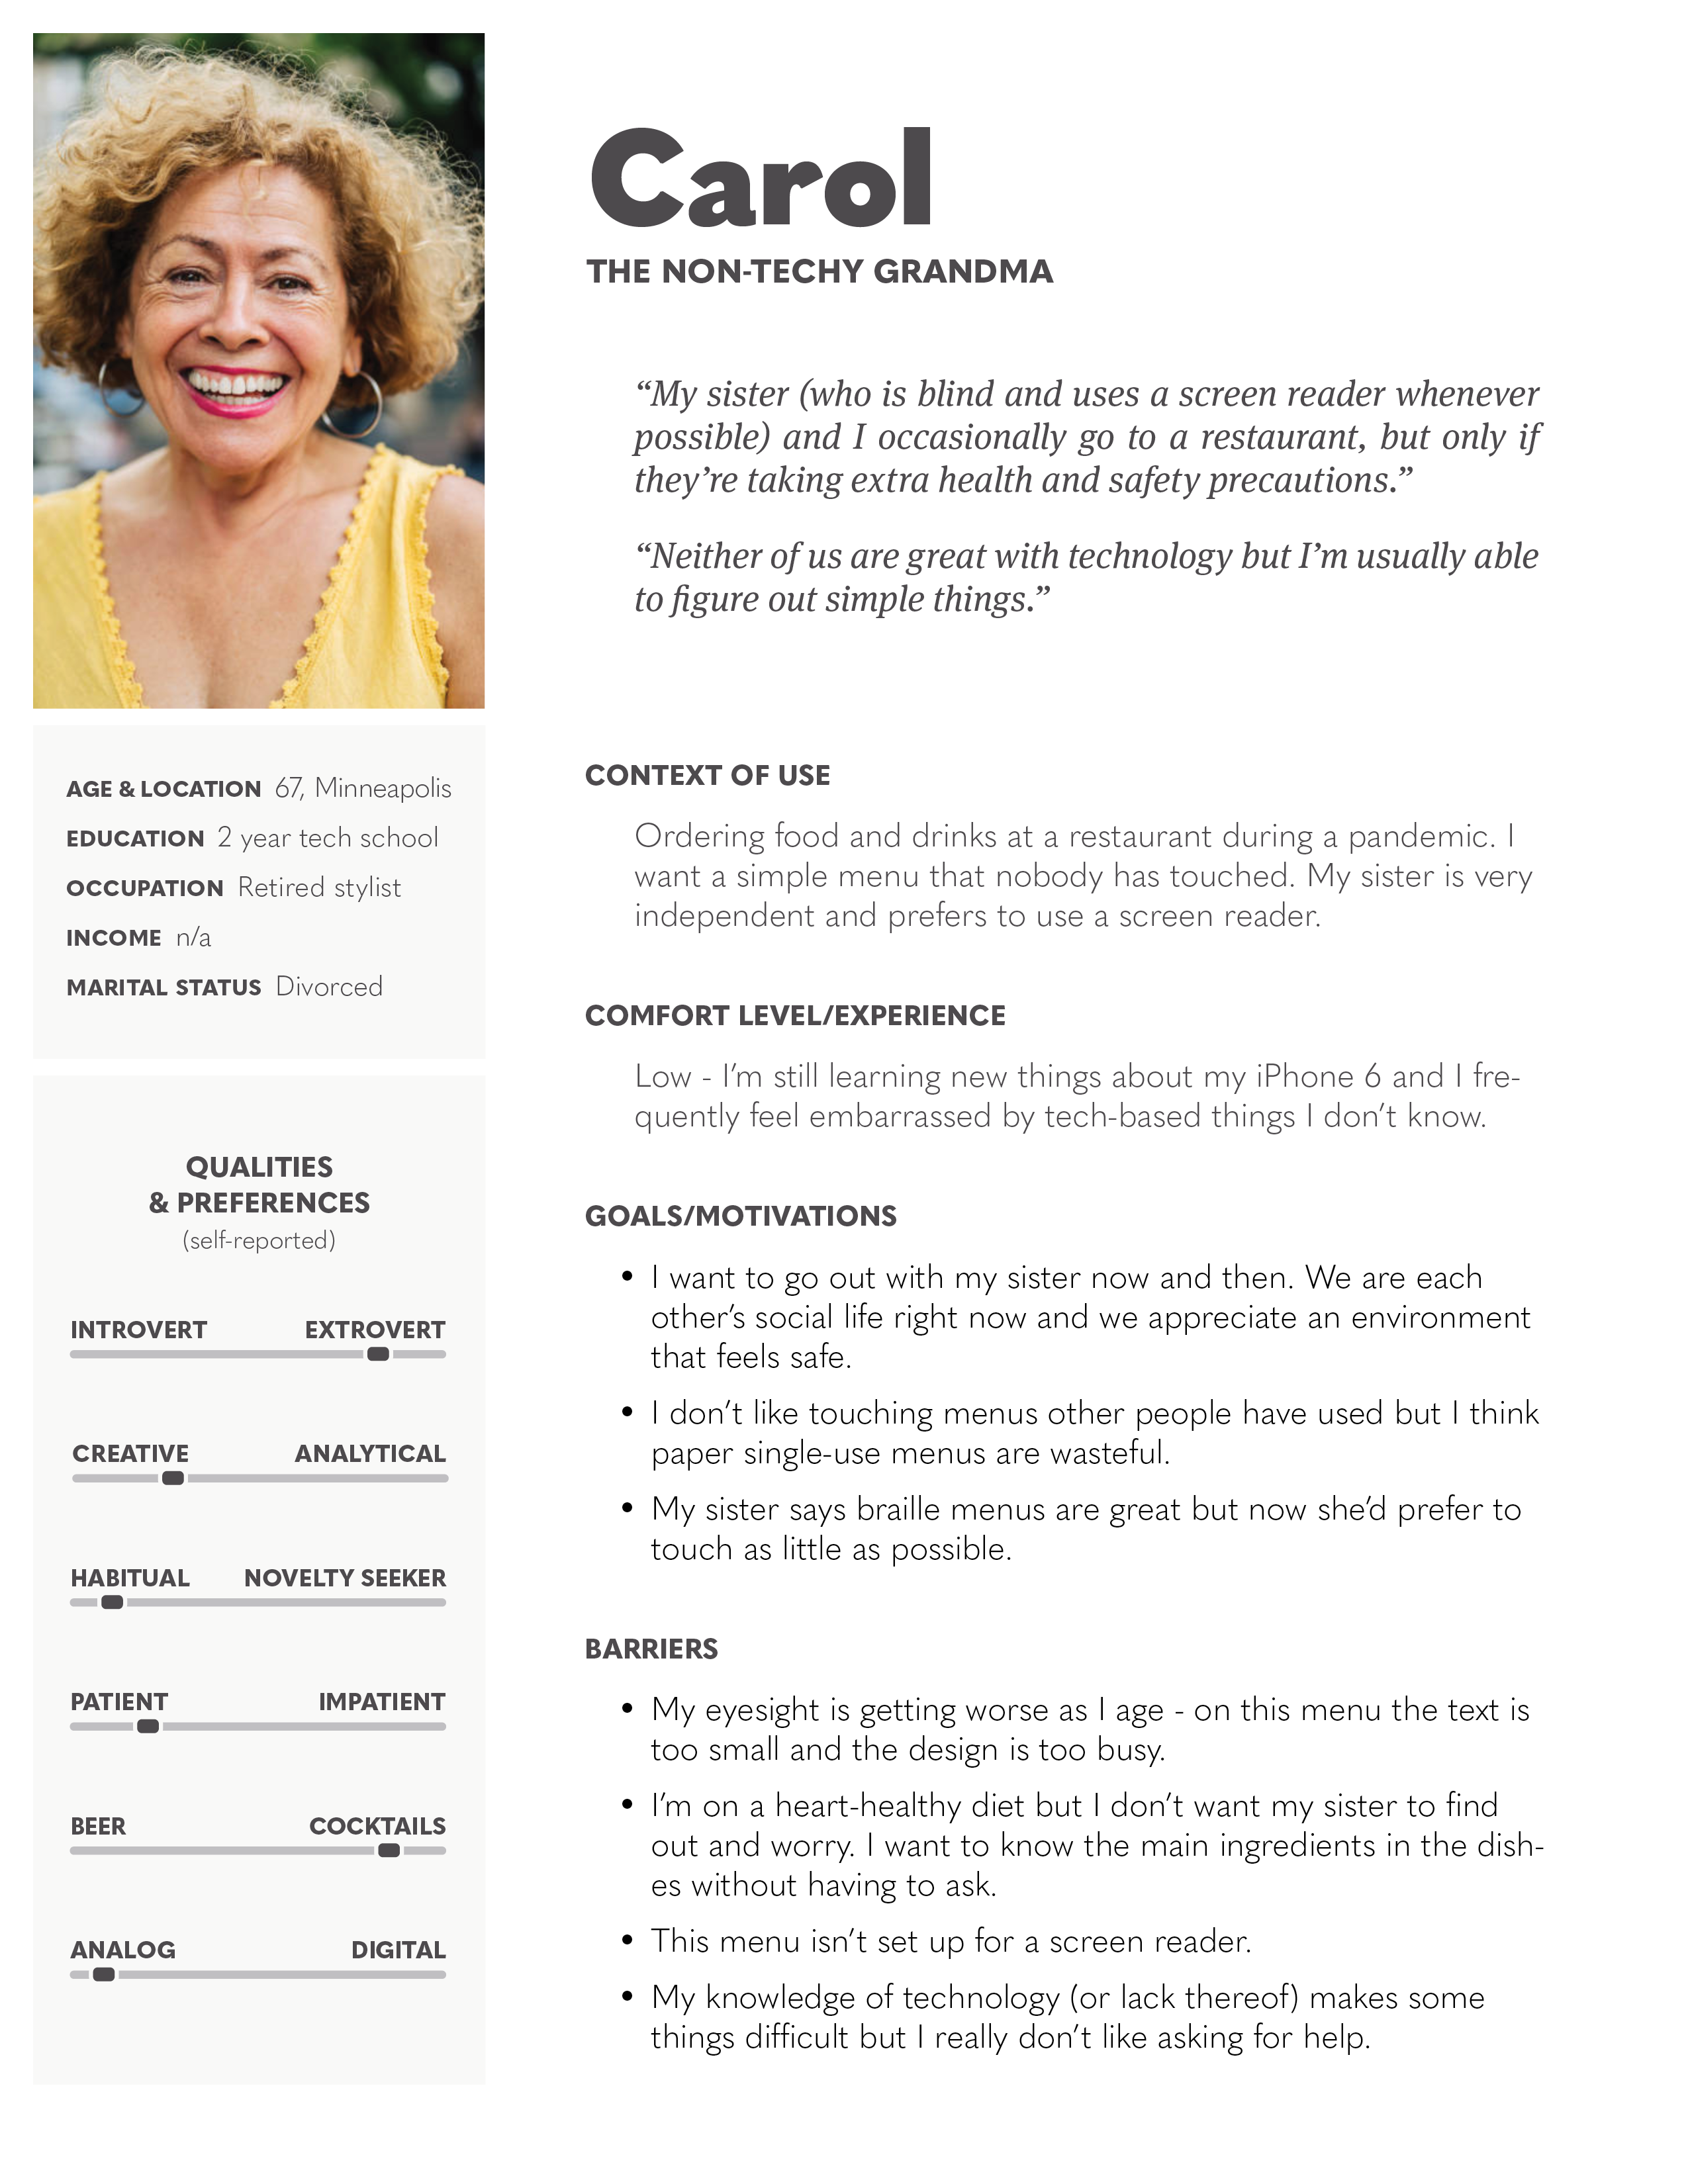 Document showing the second persona created for the UX study